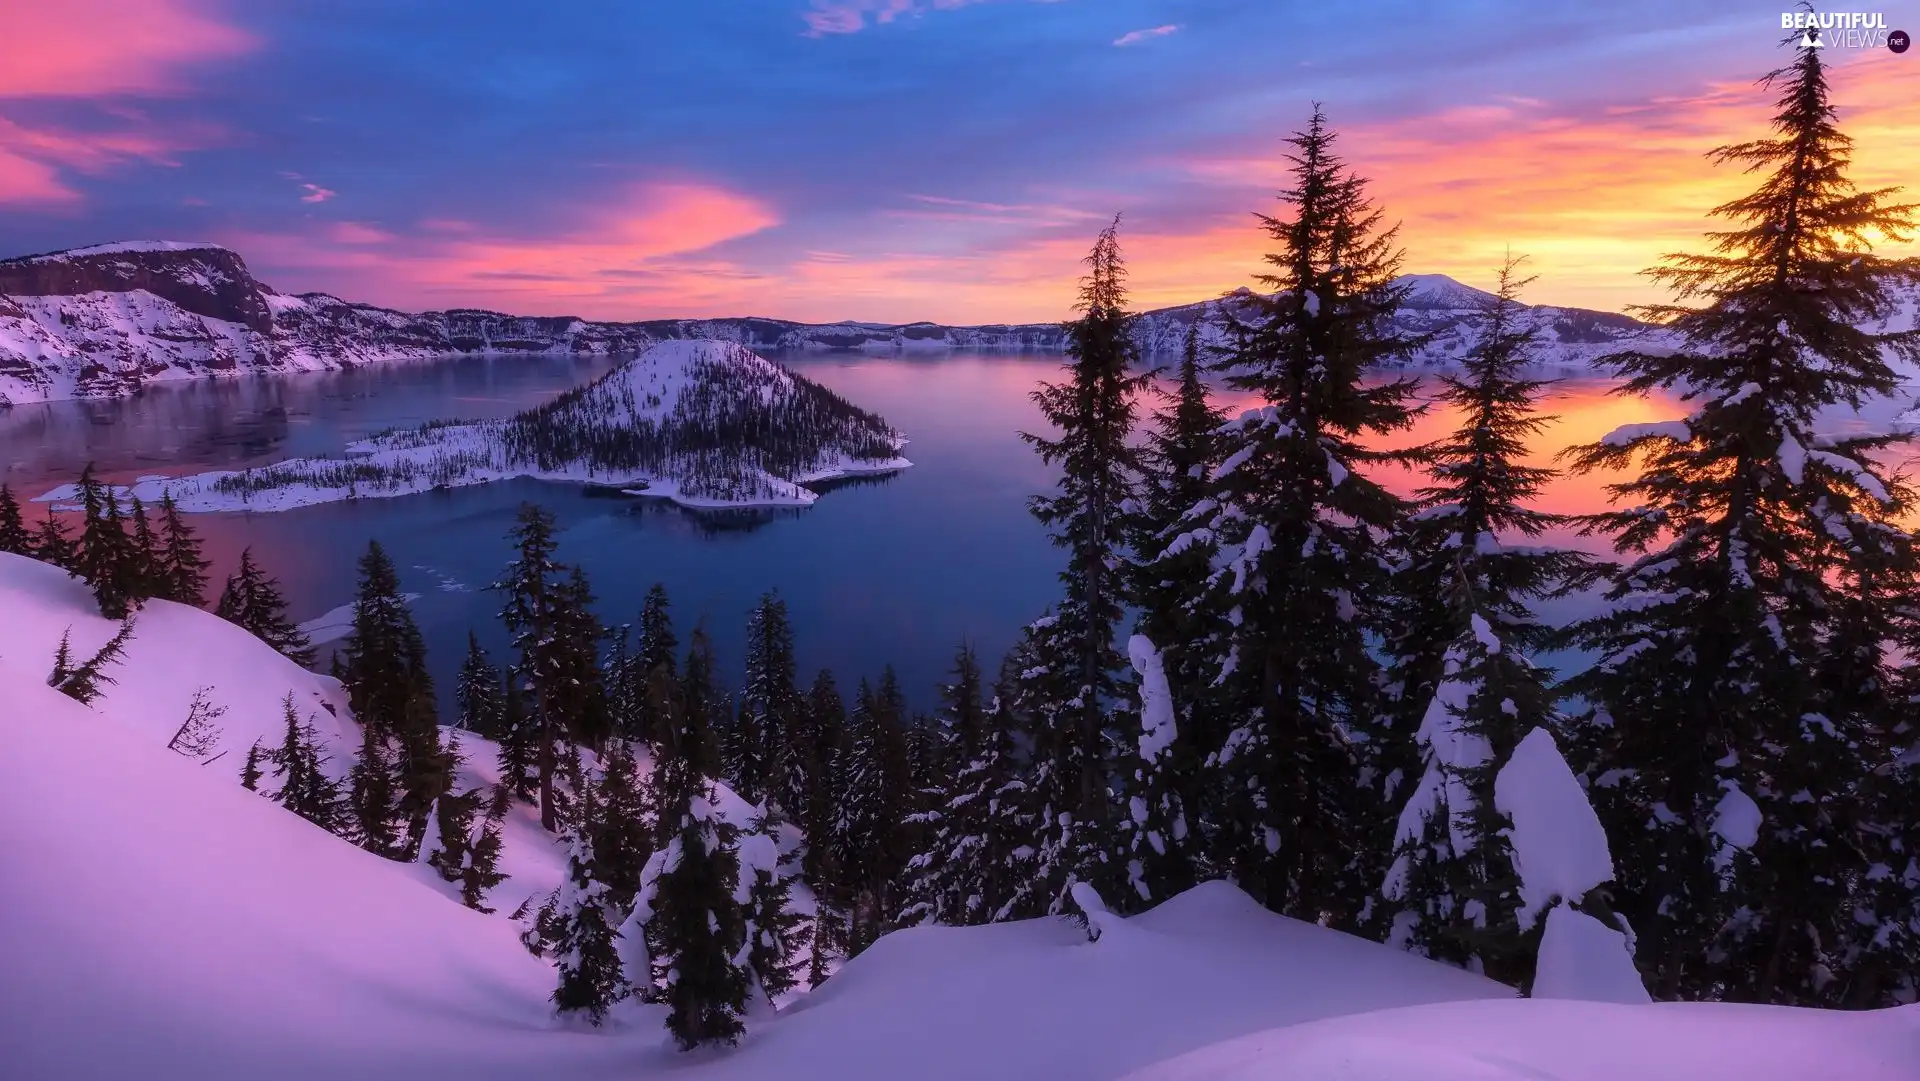 viewes, Mountains, Island of Wizard, State of Oregon, winter, Crater Lake National Park, Crater Lake, The United States, Great Sunsets, trees